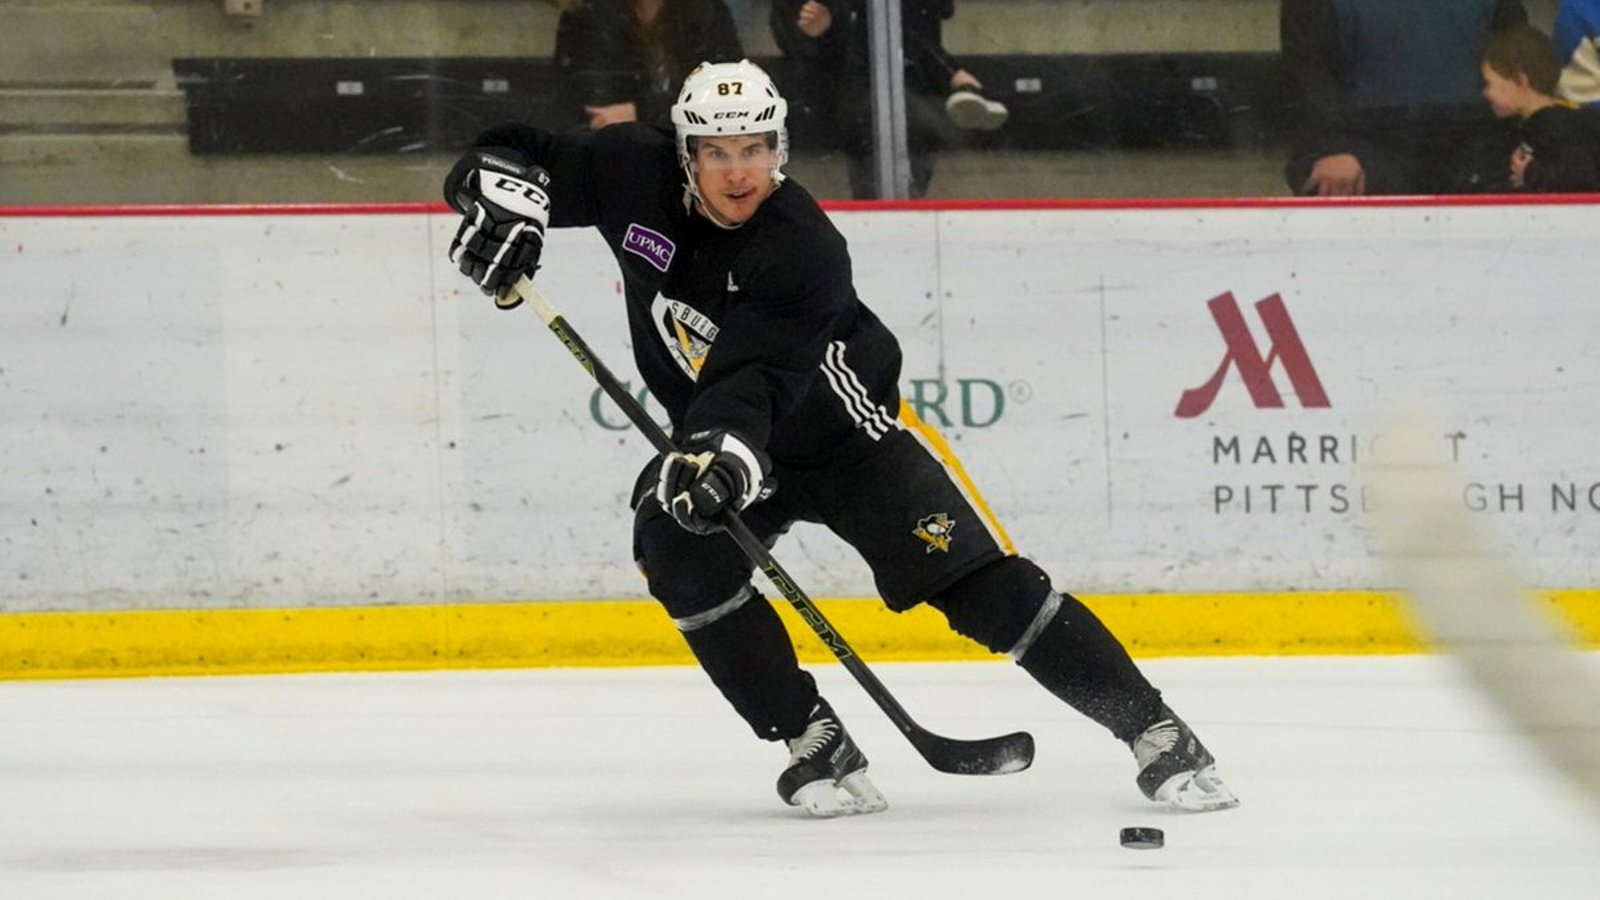 Another very confusing update on Crosby’s health and possible return